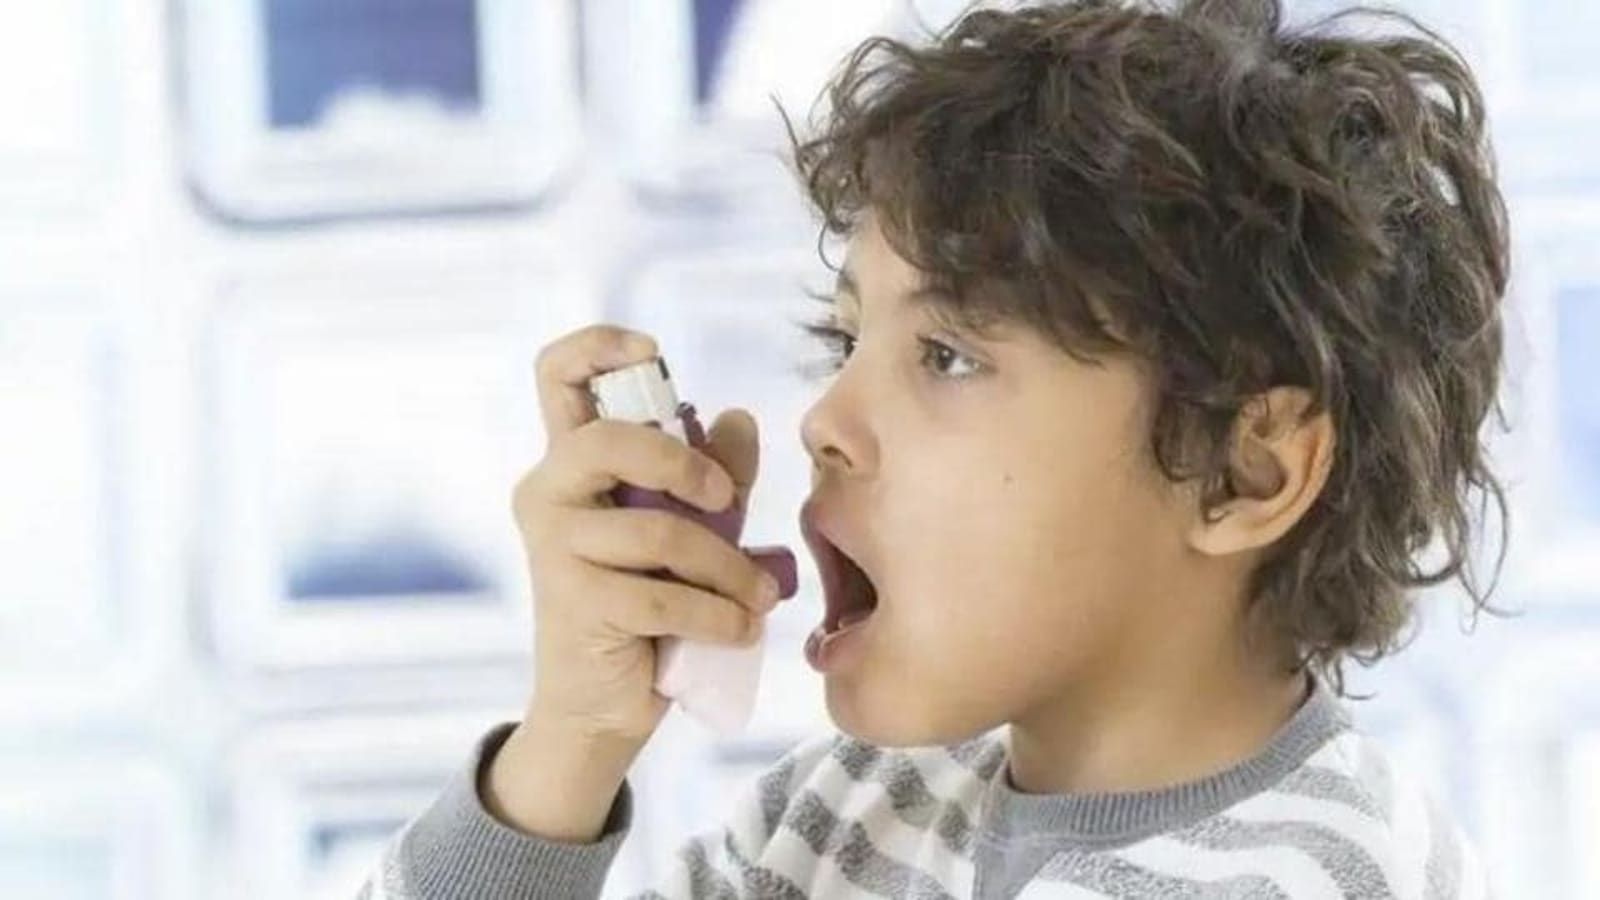 World Asthma Day 2022: How air pollution is giving rise to asthma | Health